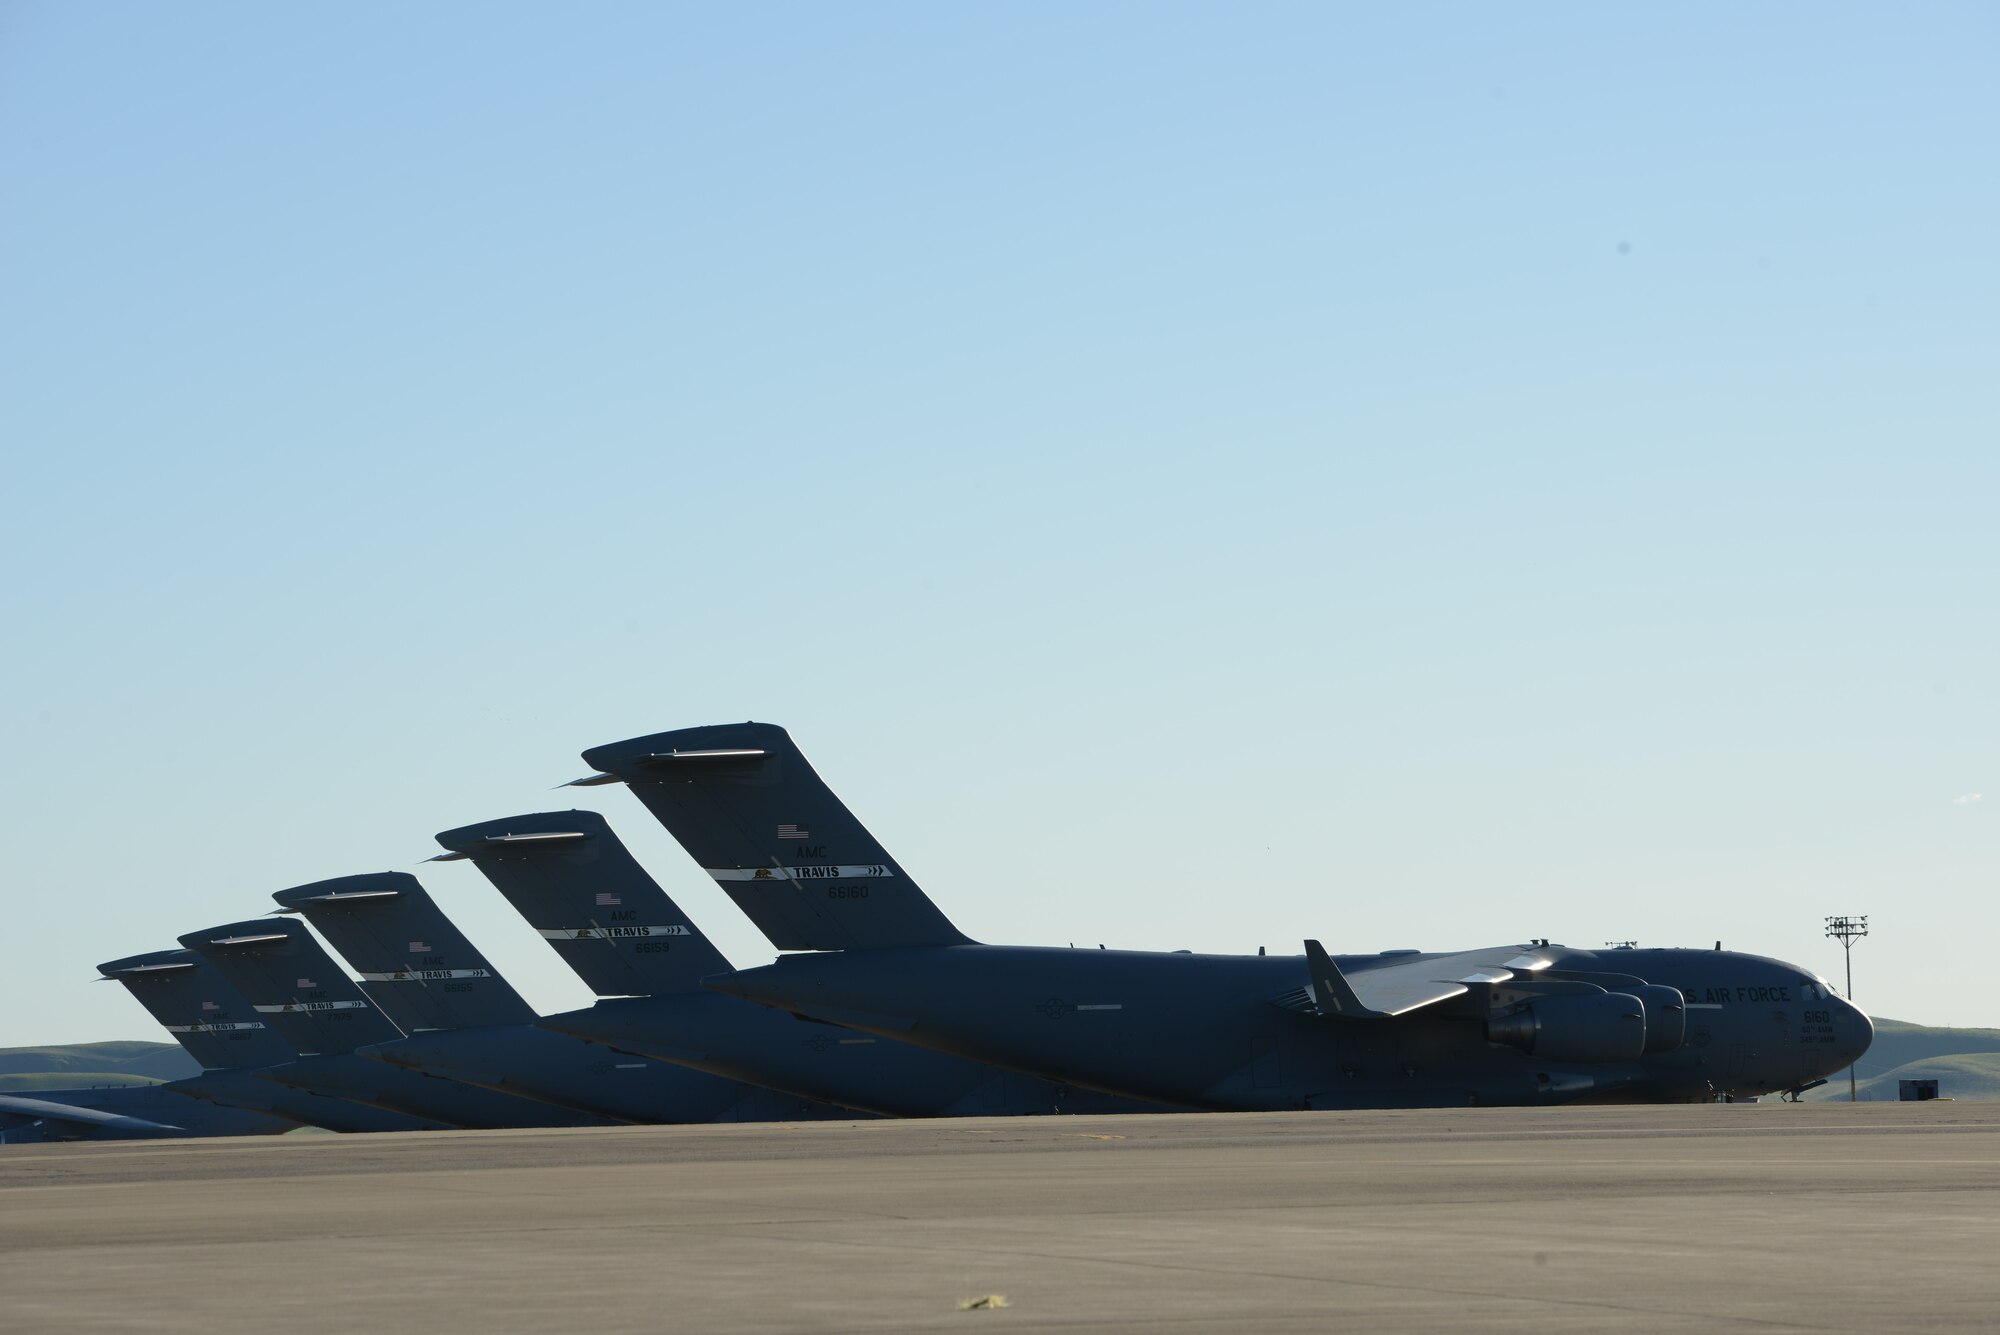 Several Air Force C-17 Globemaster III aircraft rest on the air field at Travis Air Force Base, Calif., Jan. 27, 2017. Travis aircraft support the USS Ronald Reagan by transporting parts and supplies to the ship when needed. (U.S. Navy photo by Chief Mass Communication Specialist Xander Gamble/Released)